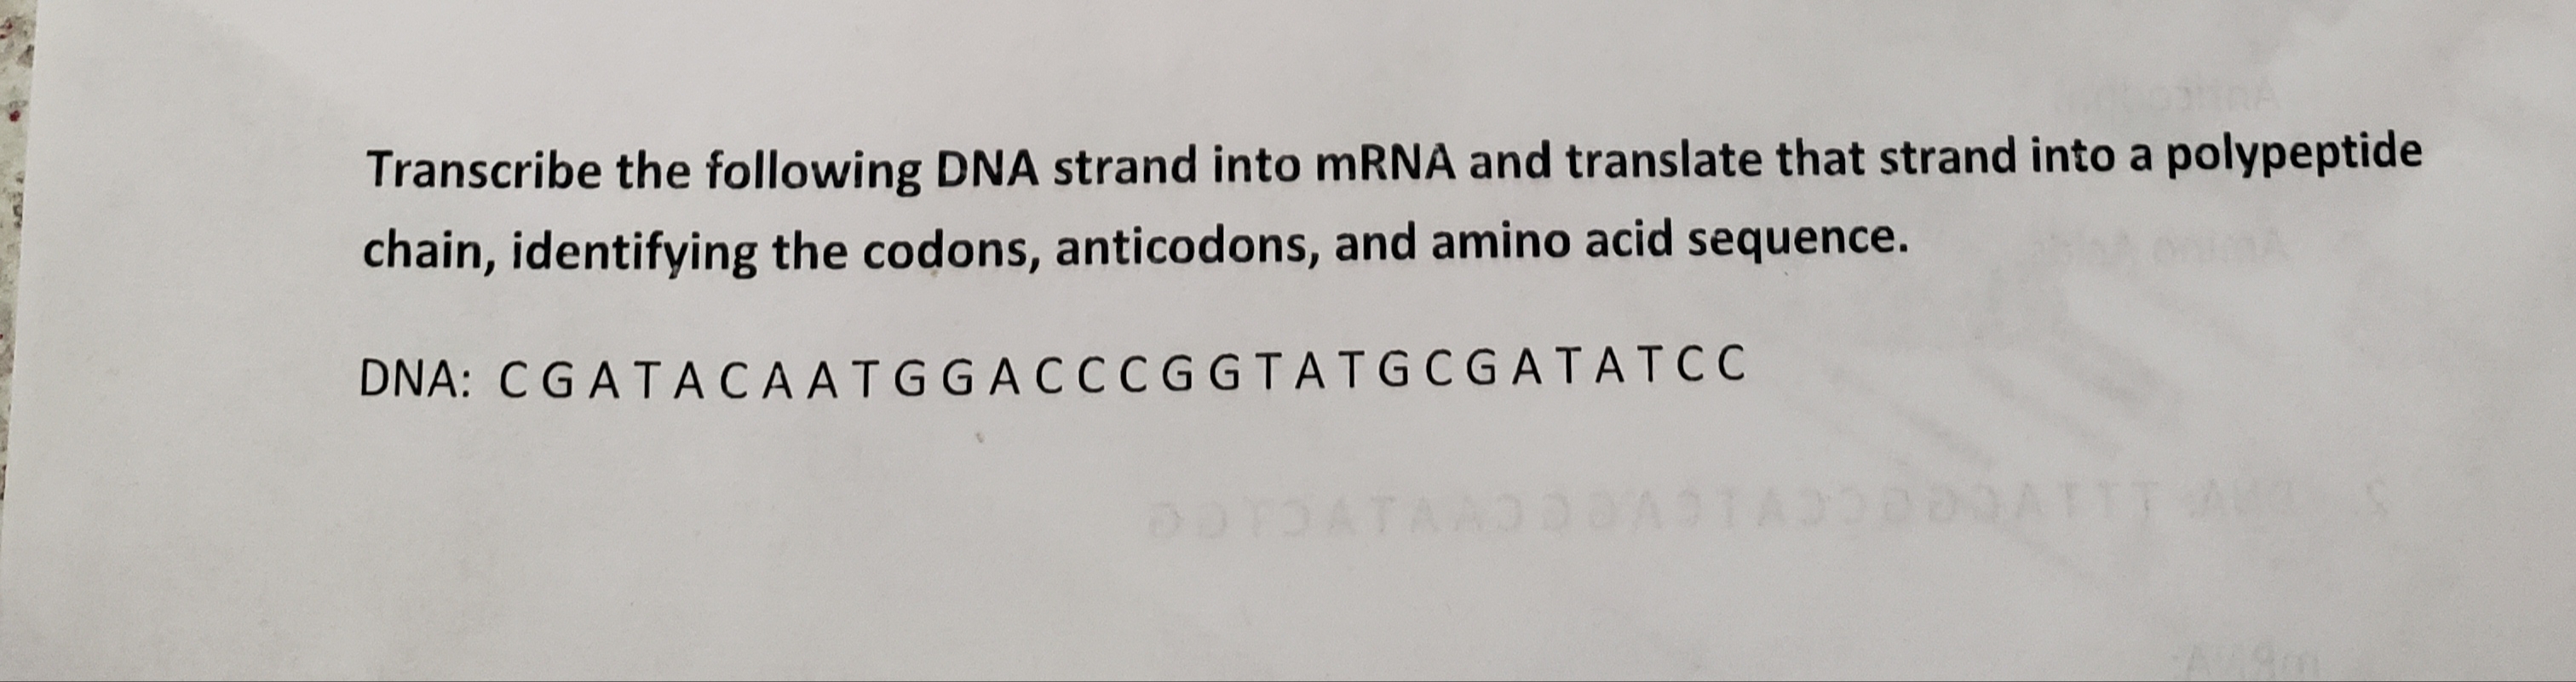 Transcribe the following DNA strand into mRNA and translate that strand into a polypeptide
chain, identifying the codons, anticodons, and amino acid sequence.
DNA: CGATACAATGGACCCGGTATGCGATATCC
ATA
